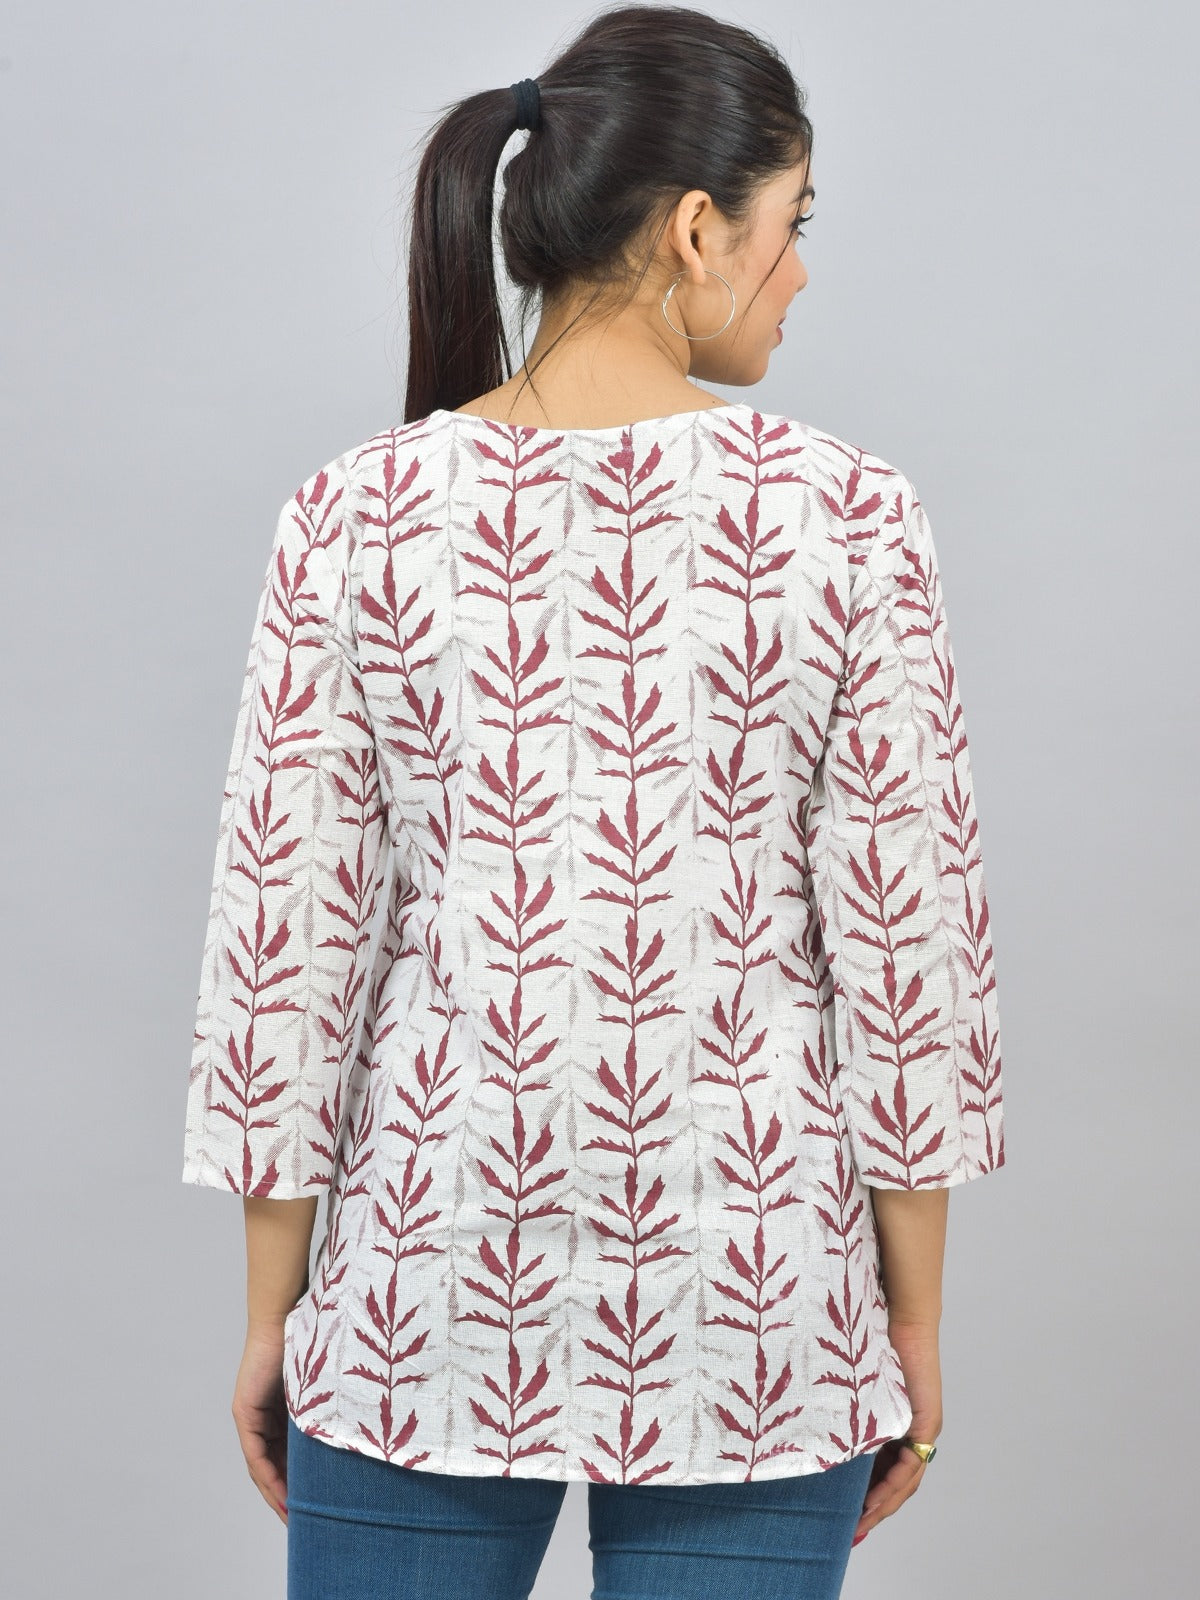 Pack Of 2 Womens Regular Fit Maroon Leaf And Pink Leaf Printed Tops Combo